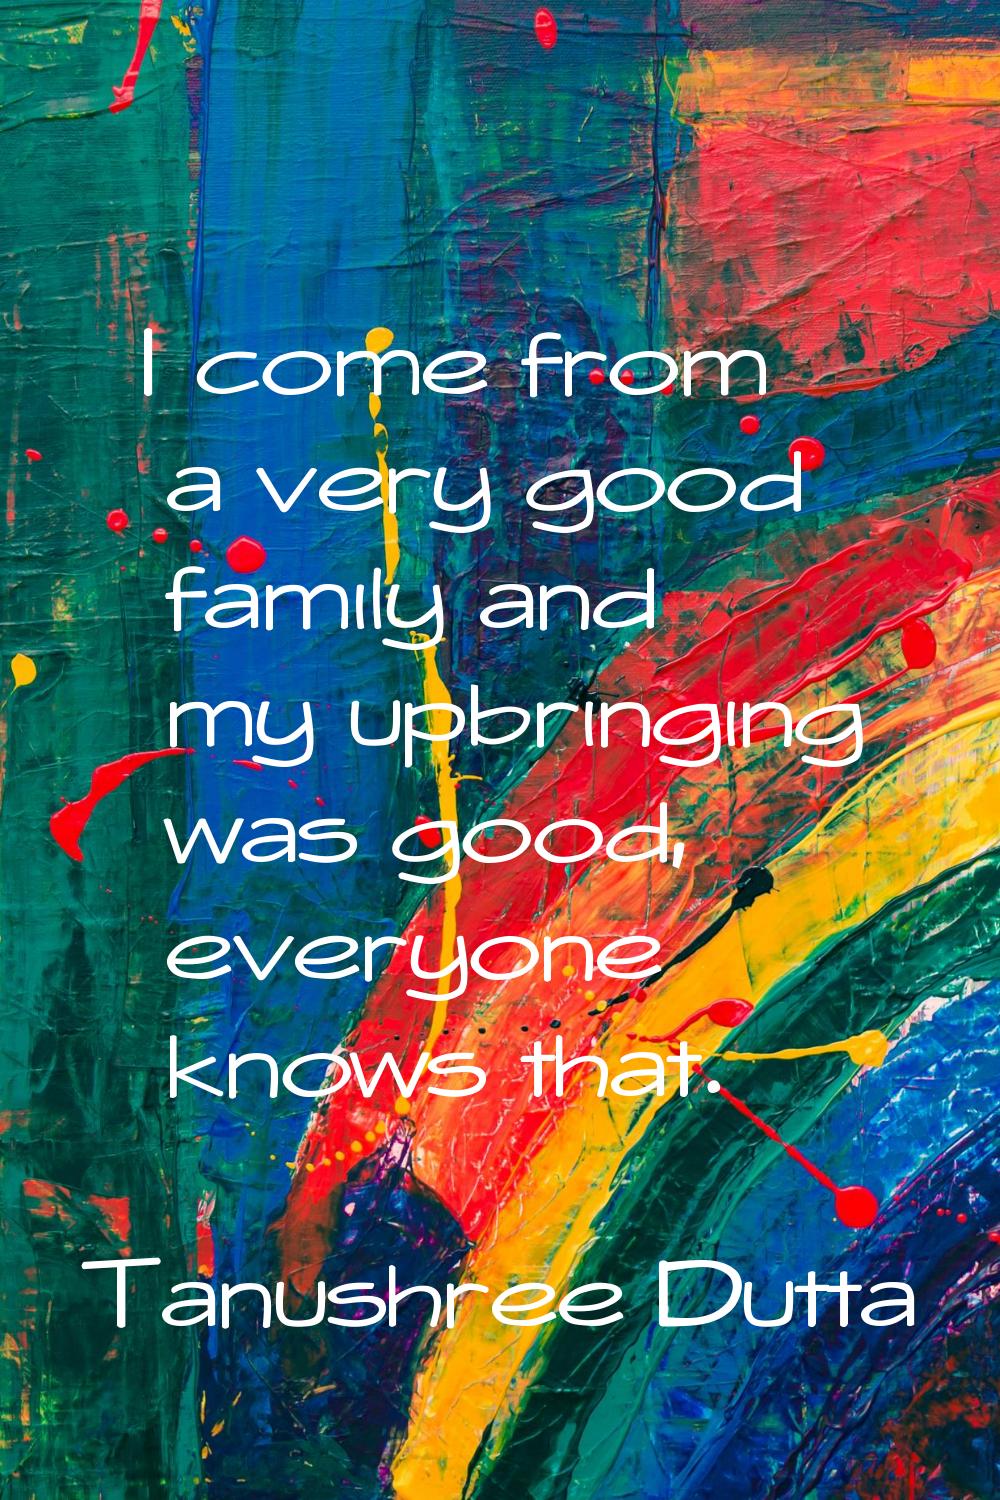 I come from a very good family and my upbringing was good, everyone knows that.